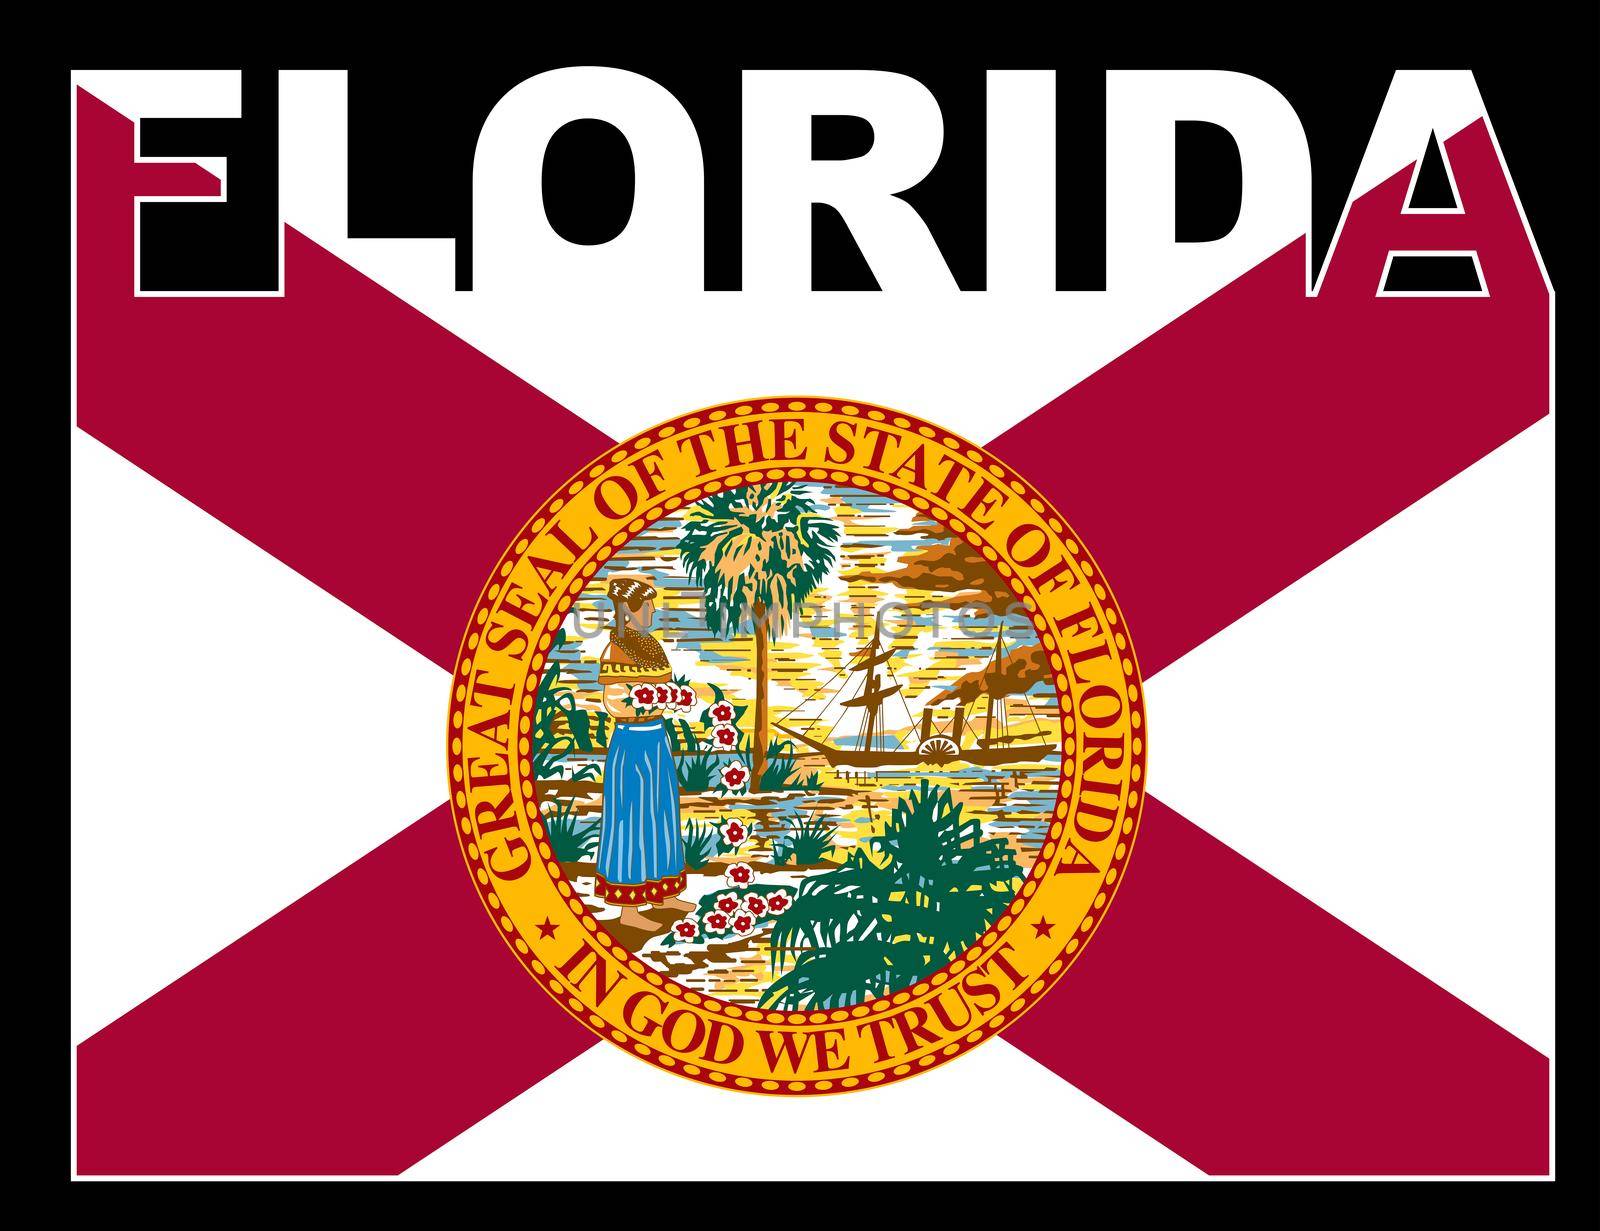 FloridaText in silhouette set over the state flag